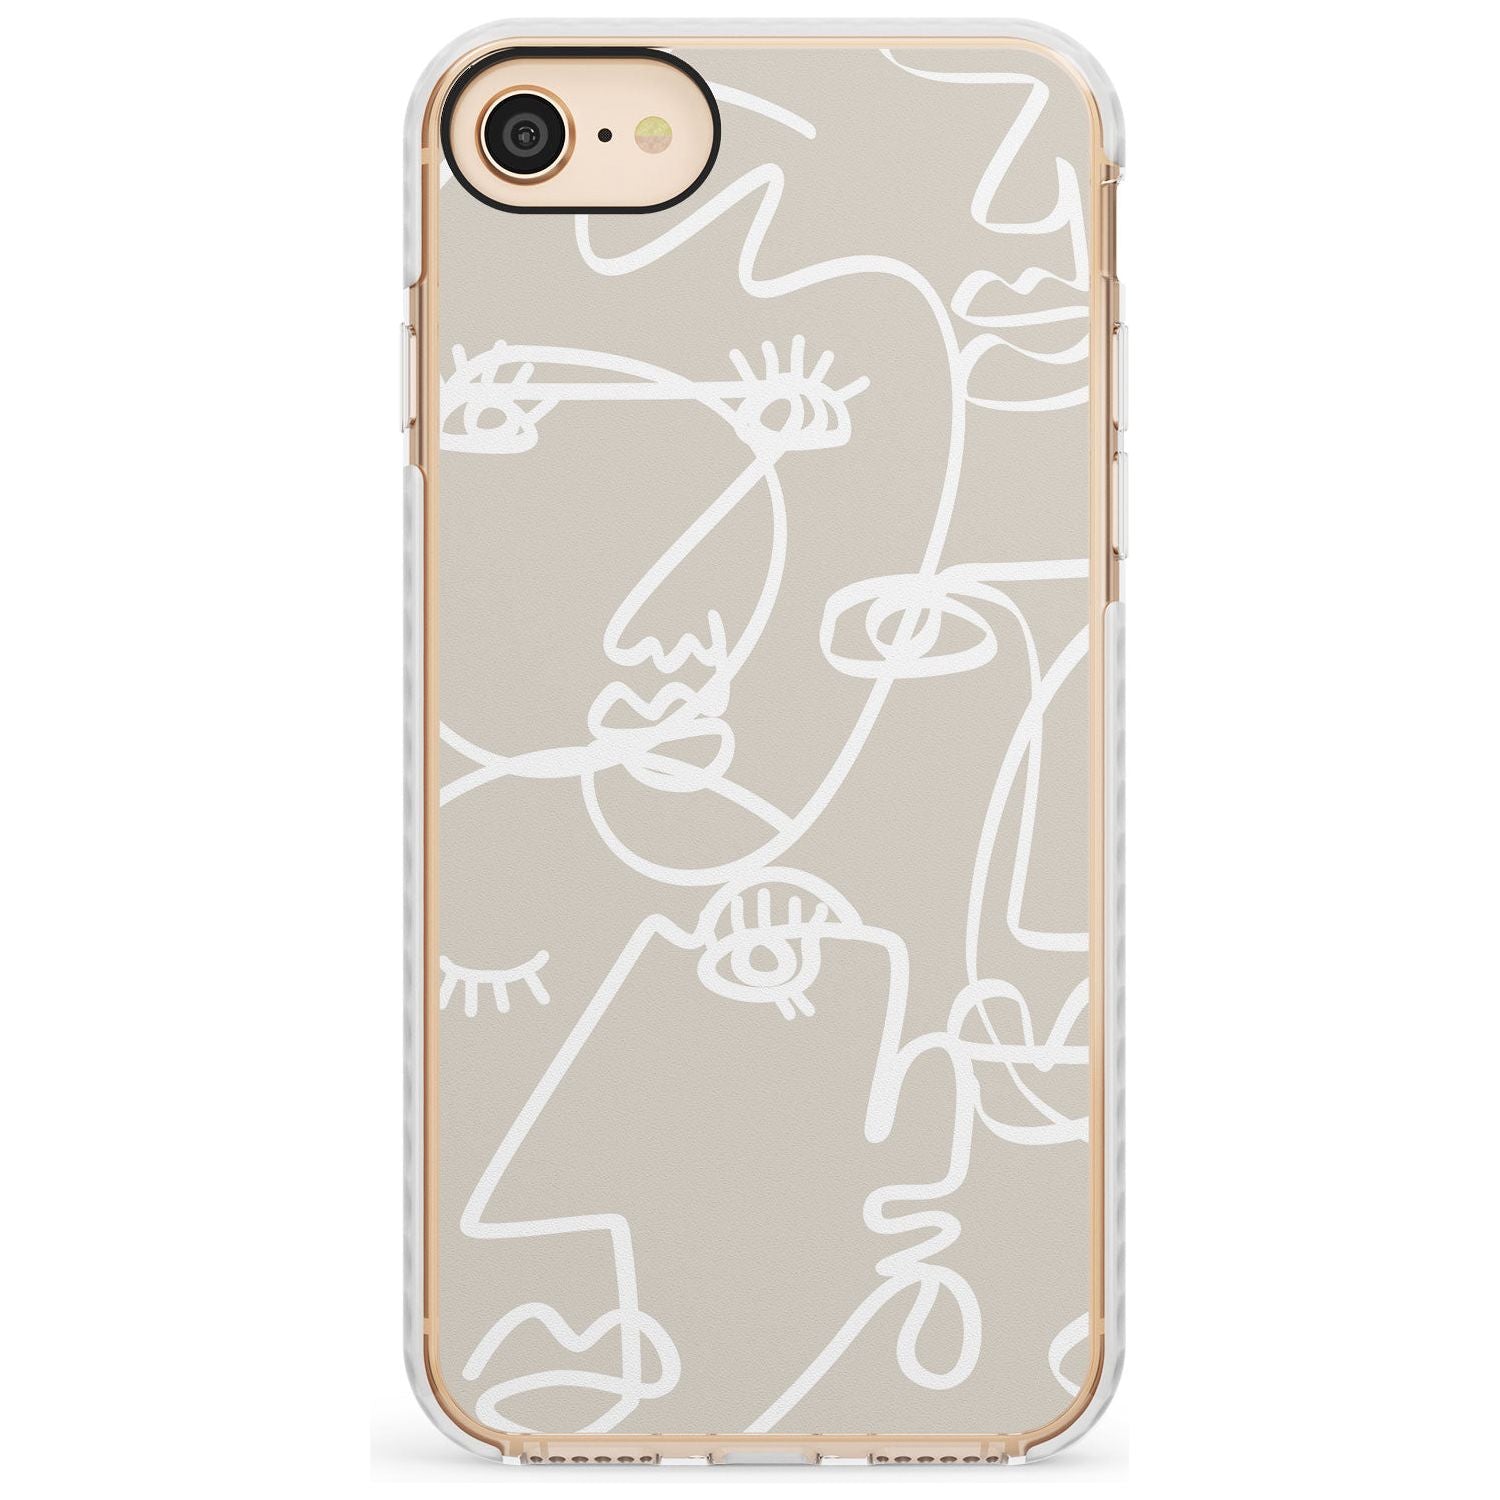 Continuous Line Faces: White on Beige Slim TPU Phone Case for iPhone SE 8 7 Plus